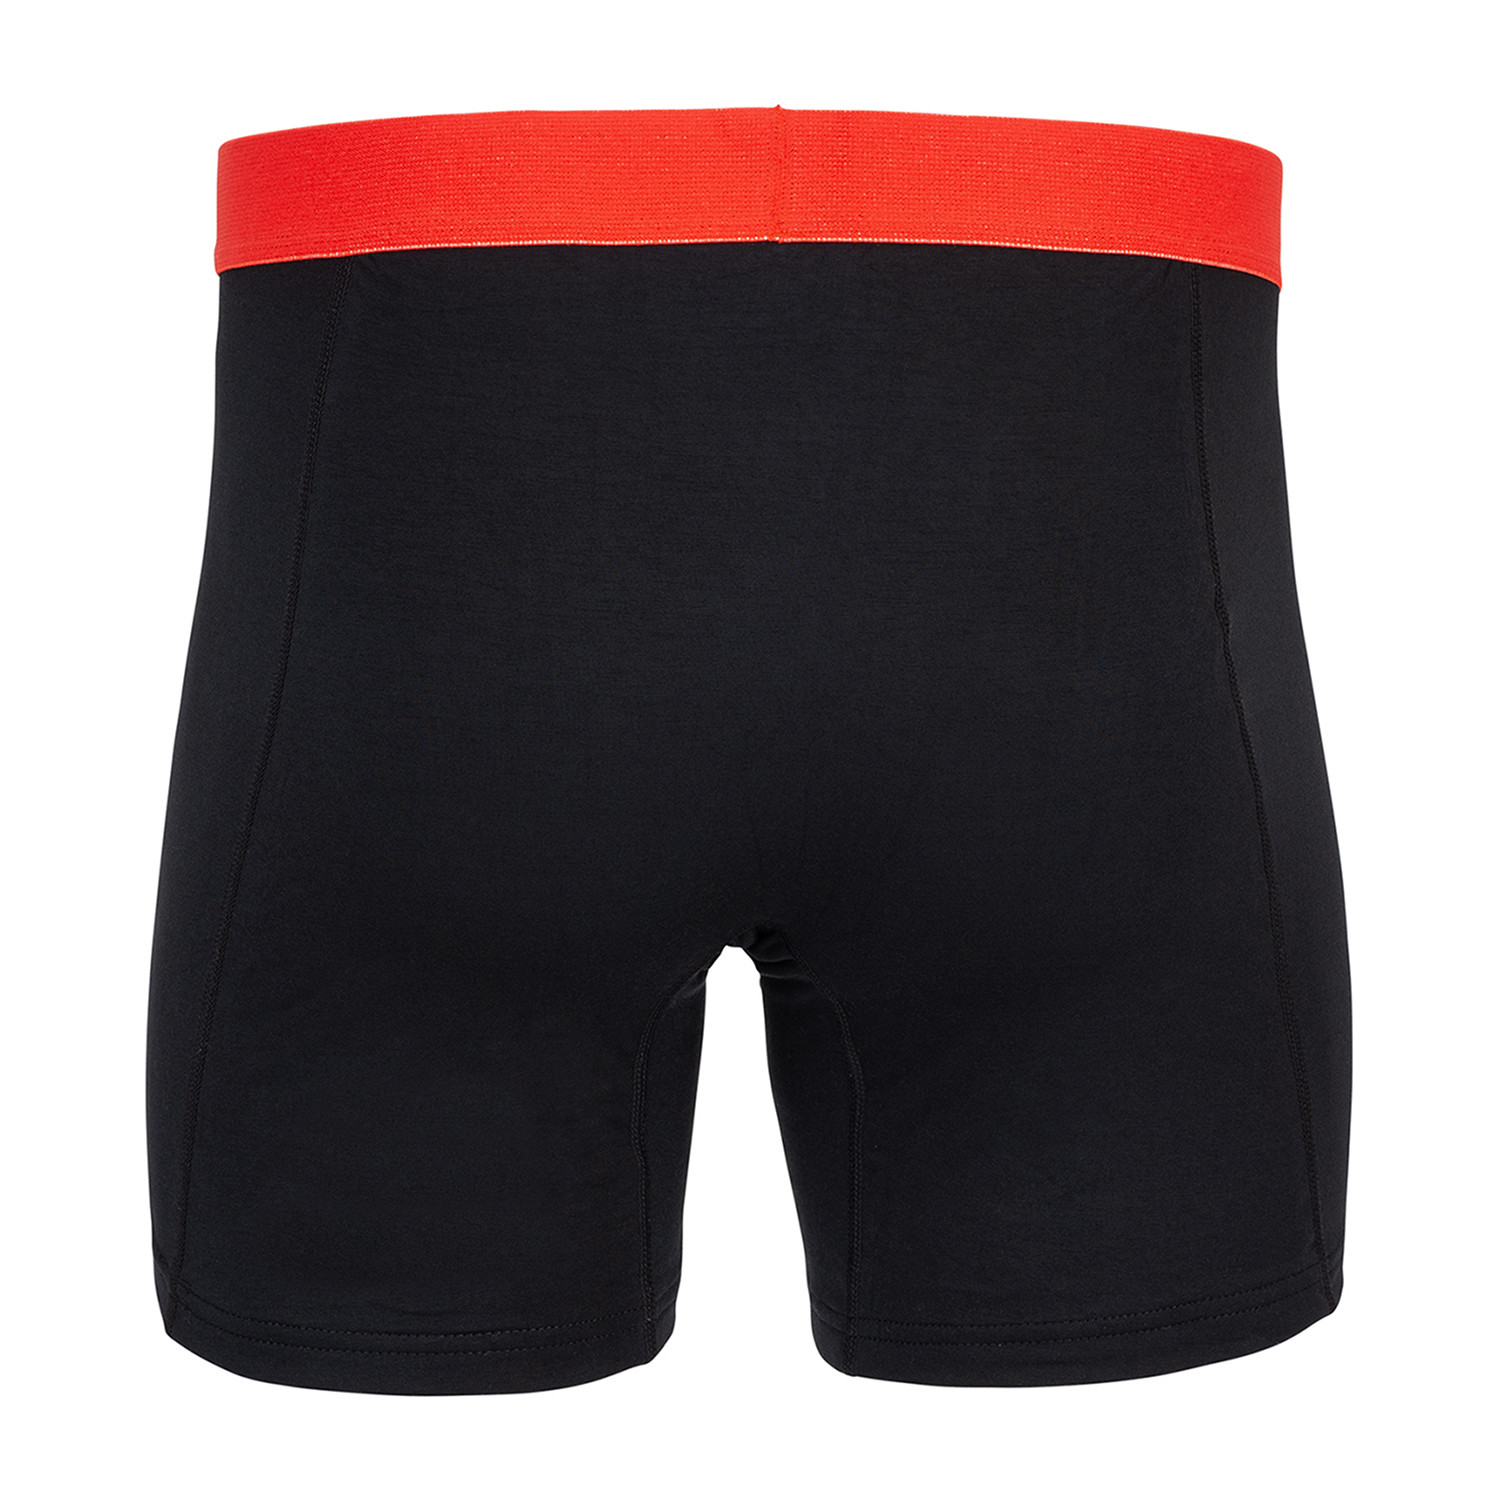 Sweat Proof Boxer Brief + Comfort Pouch // Black + Red (XS) - Ejis